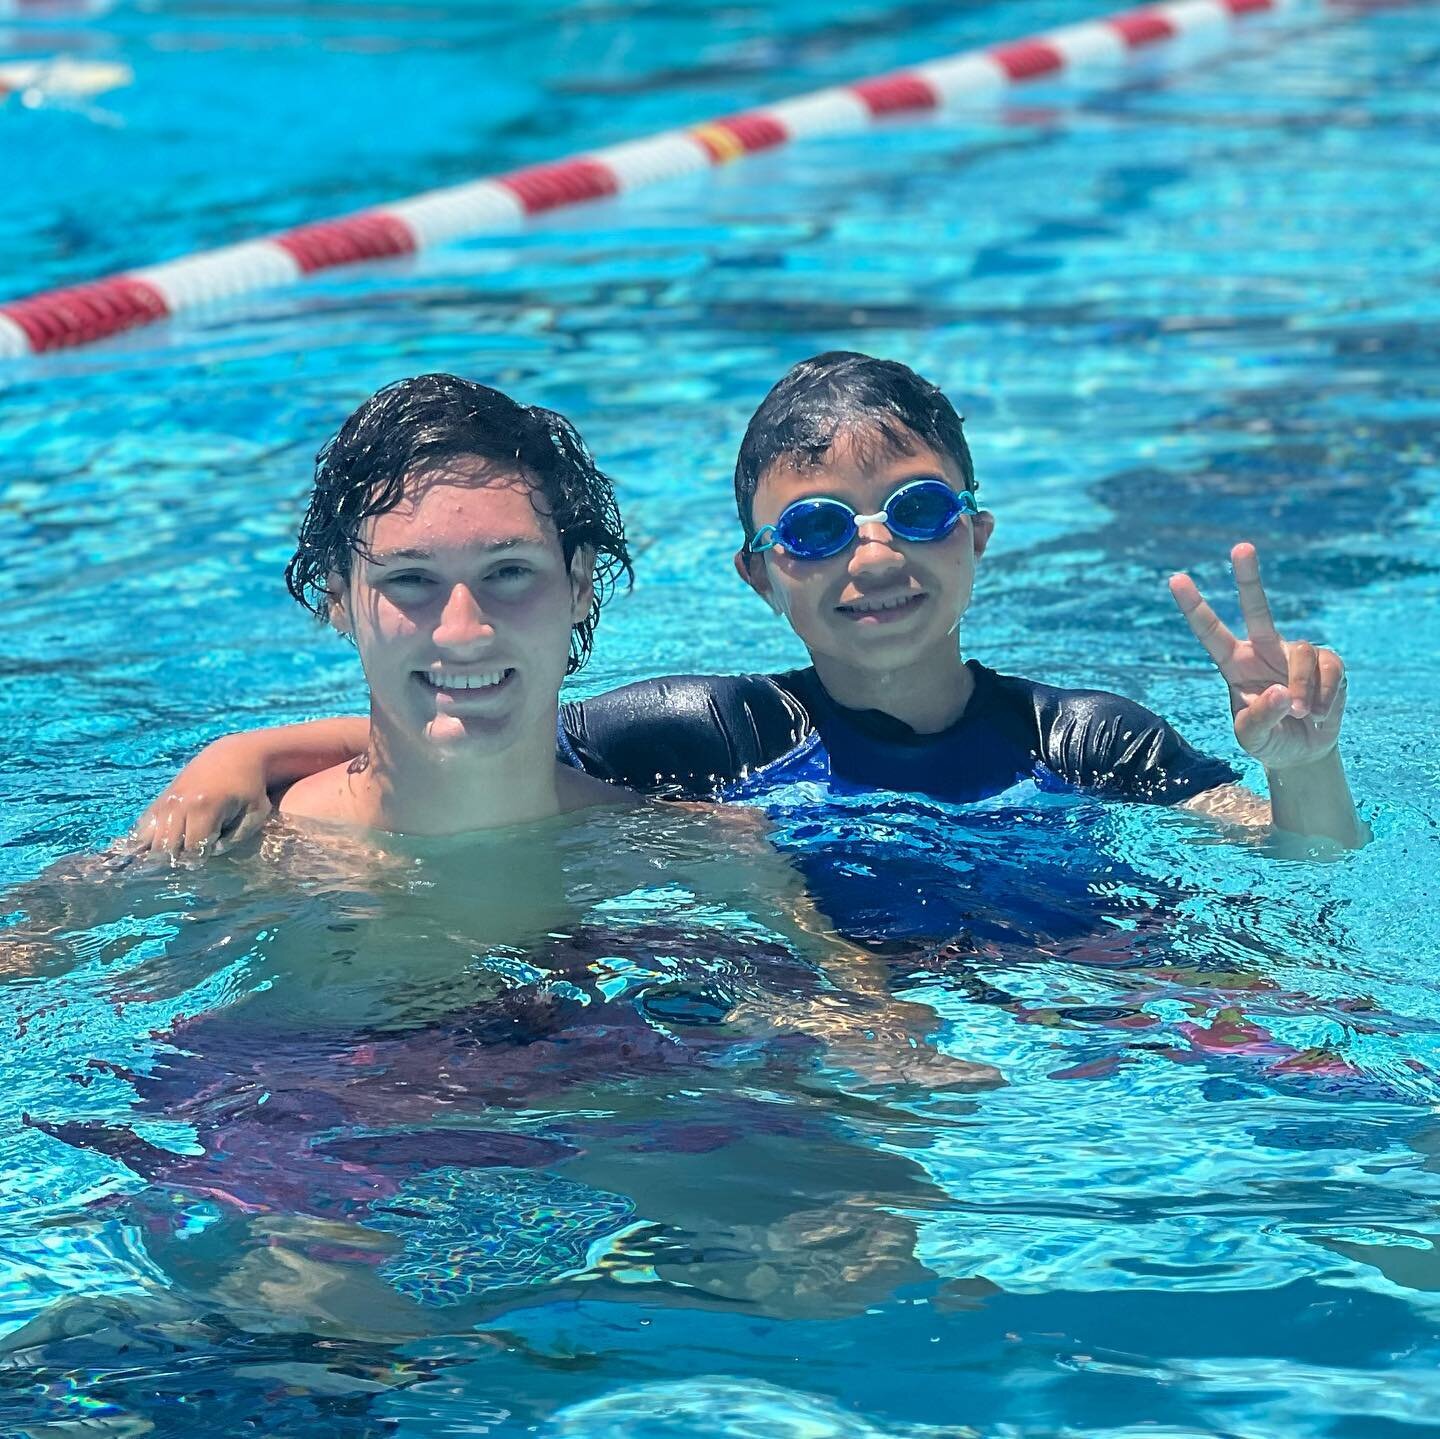 Saturdays are for splashin&rsquo; around thanks to @cortemaderaparksandrec &amp; @tuhsdcommunityed for making free swim lessons possible at #redwoodhighschool 💦💦